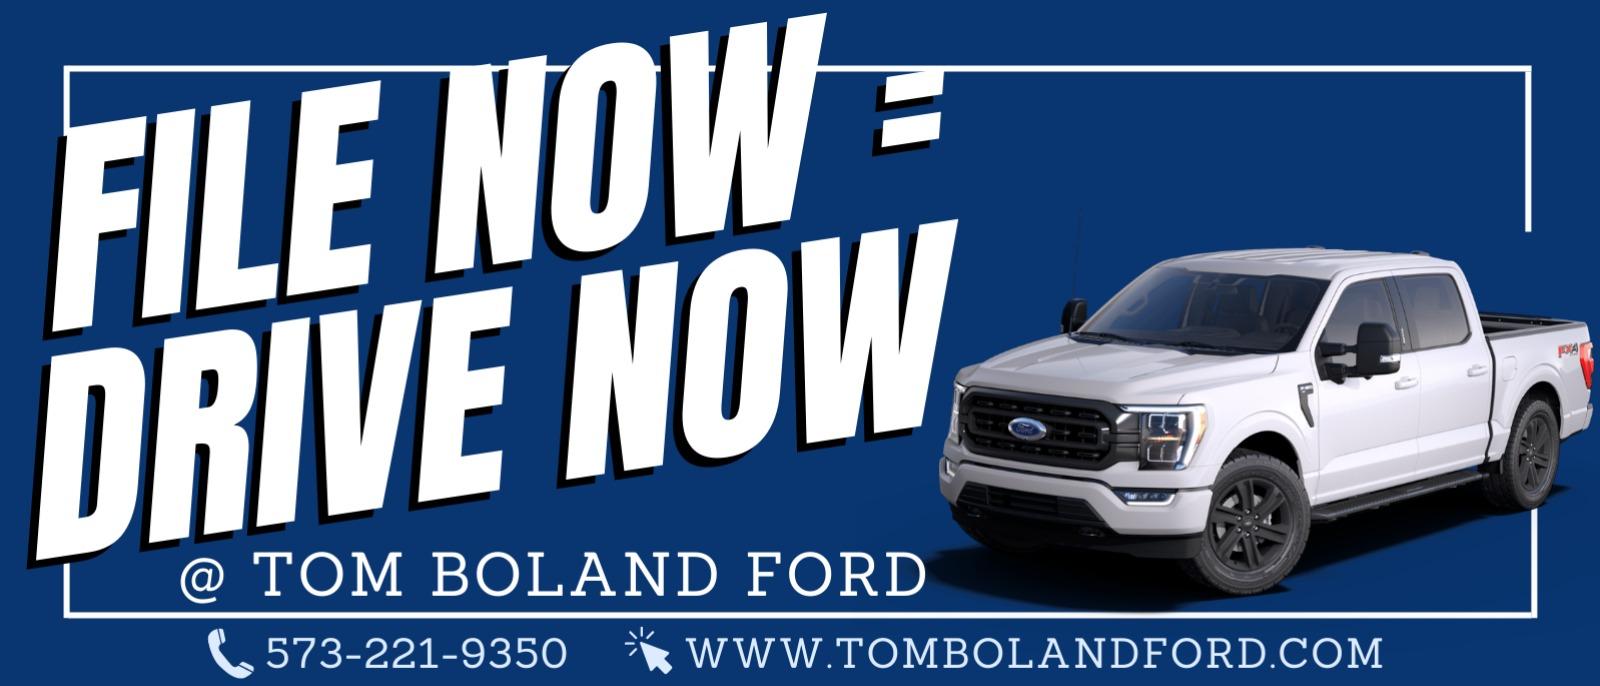 Tom Boland Ford | New & Used Ford Dealer In Hannibal MO